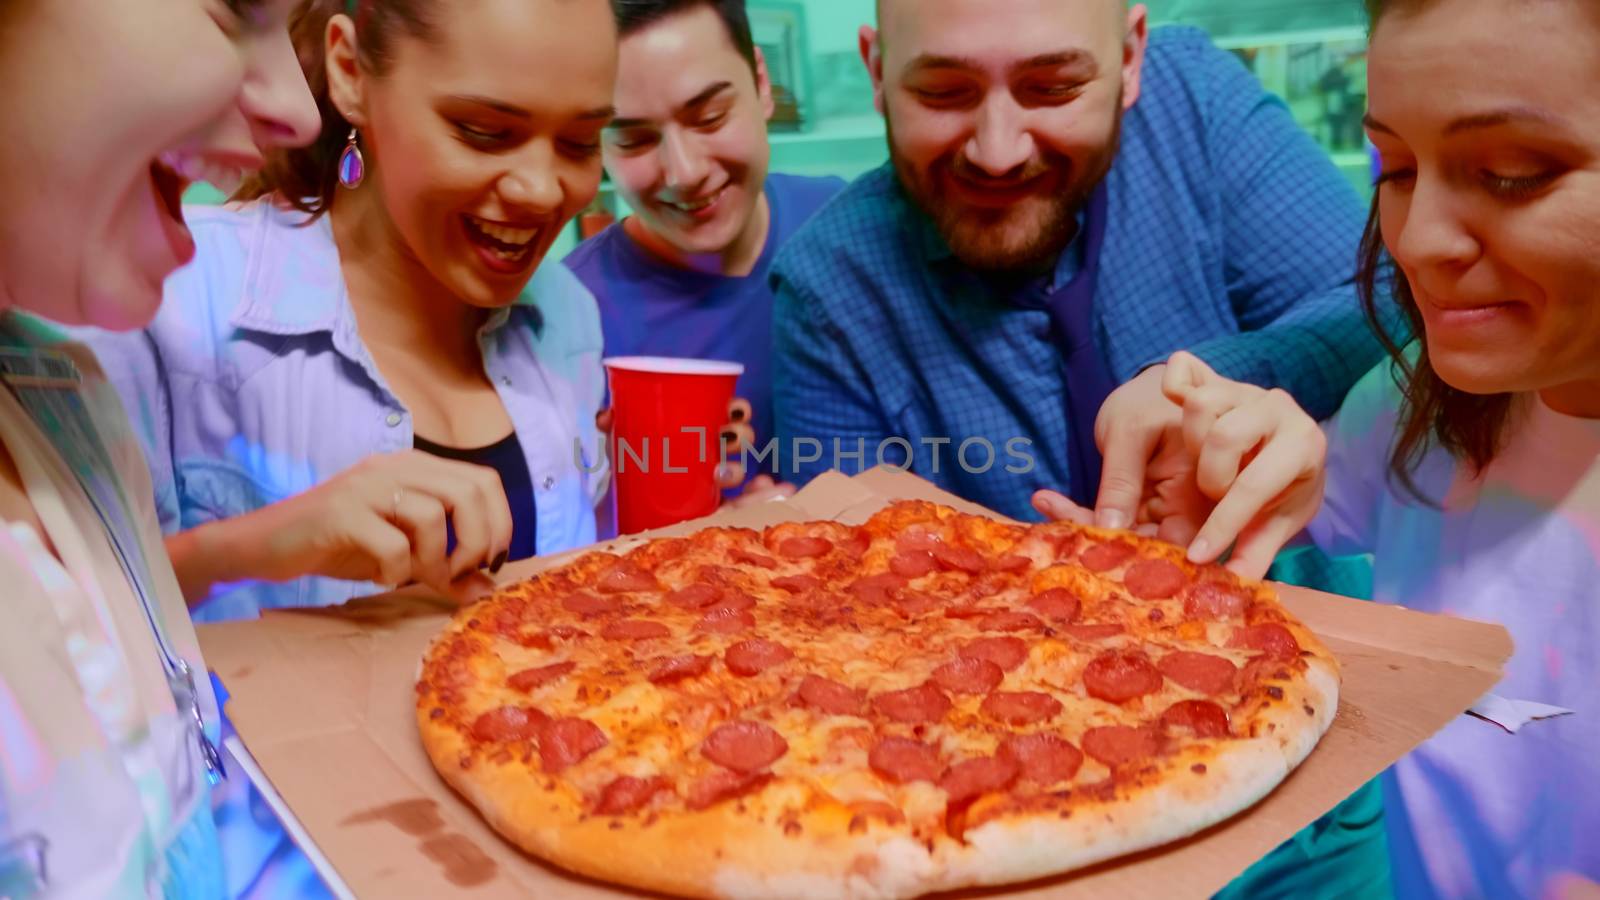 Follow shot of girl arriving at the party with delicious pizza for her friends. Excited group of people.